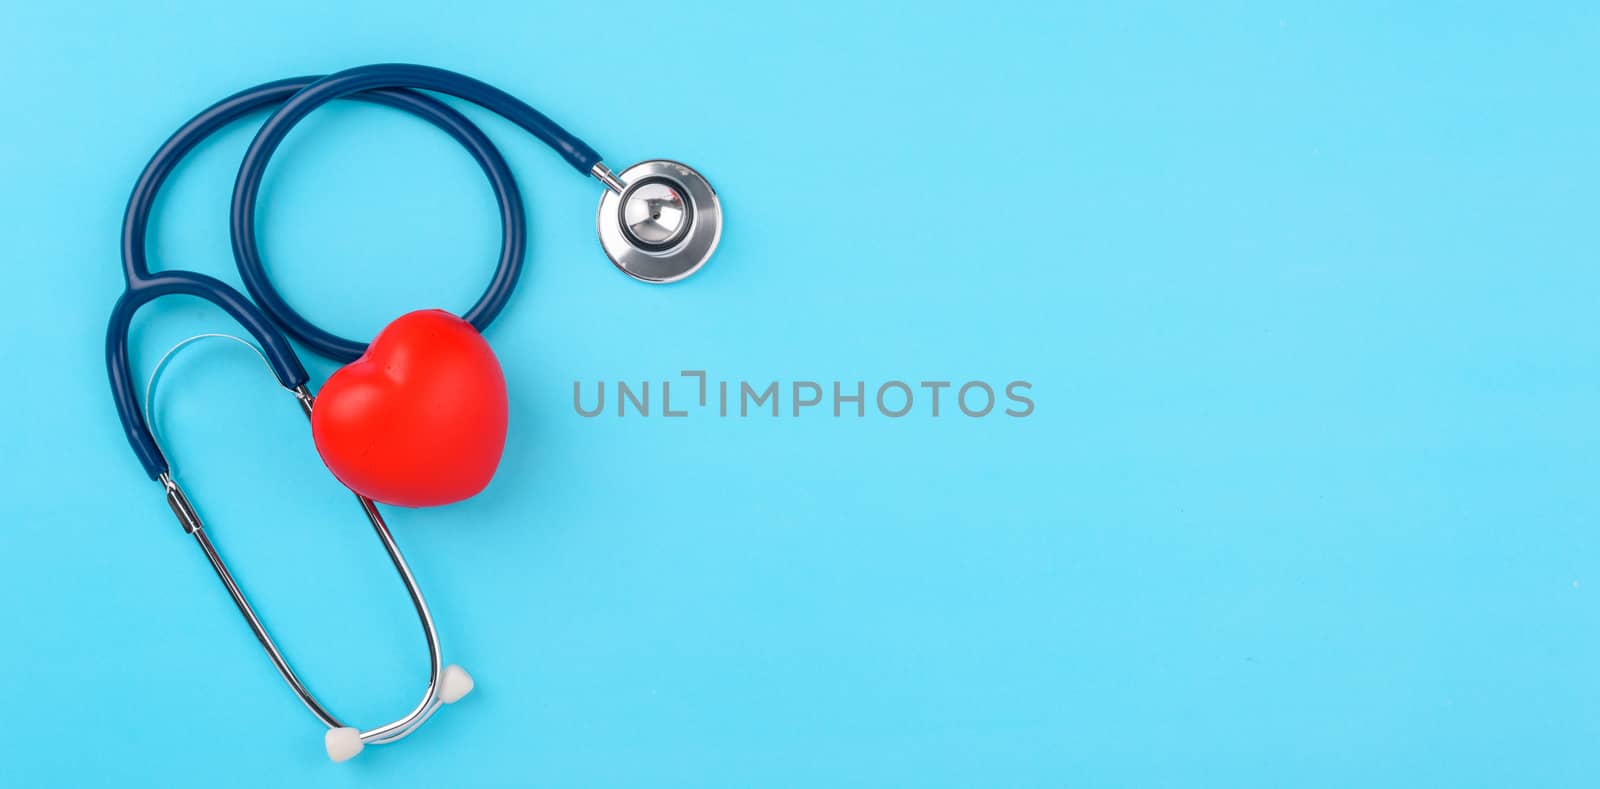 Doctor's Day concept, flat lay top view, stethoscope with red hearts diagnosis of heart disease on blue background with copy space for text